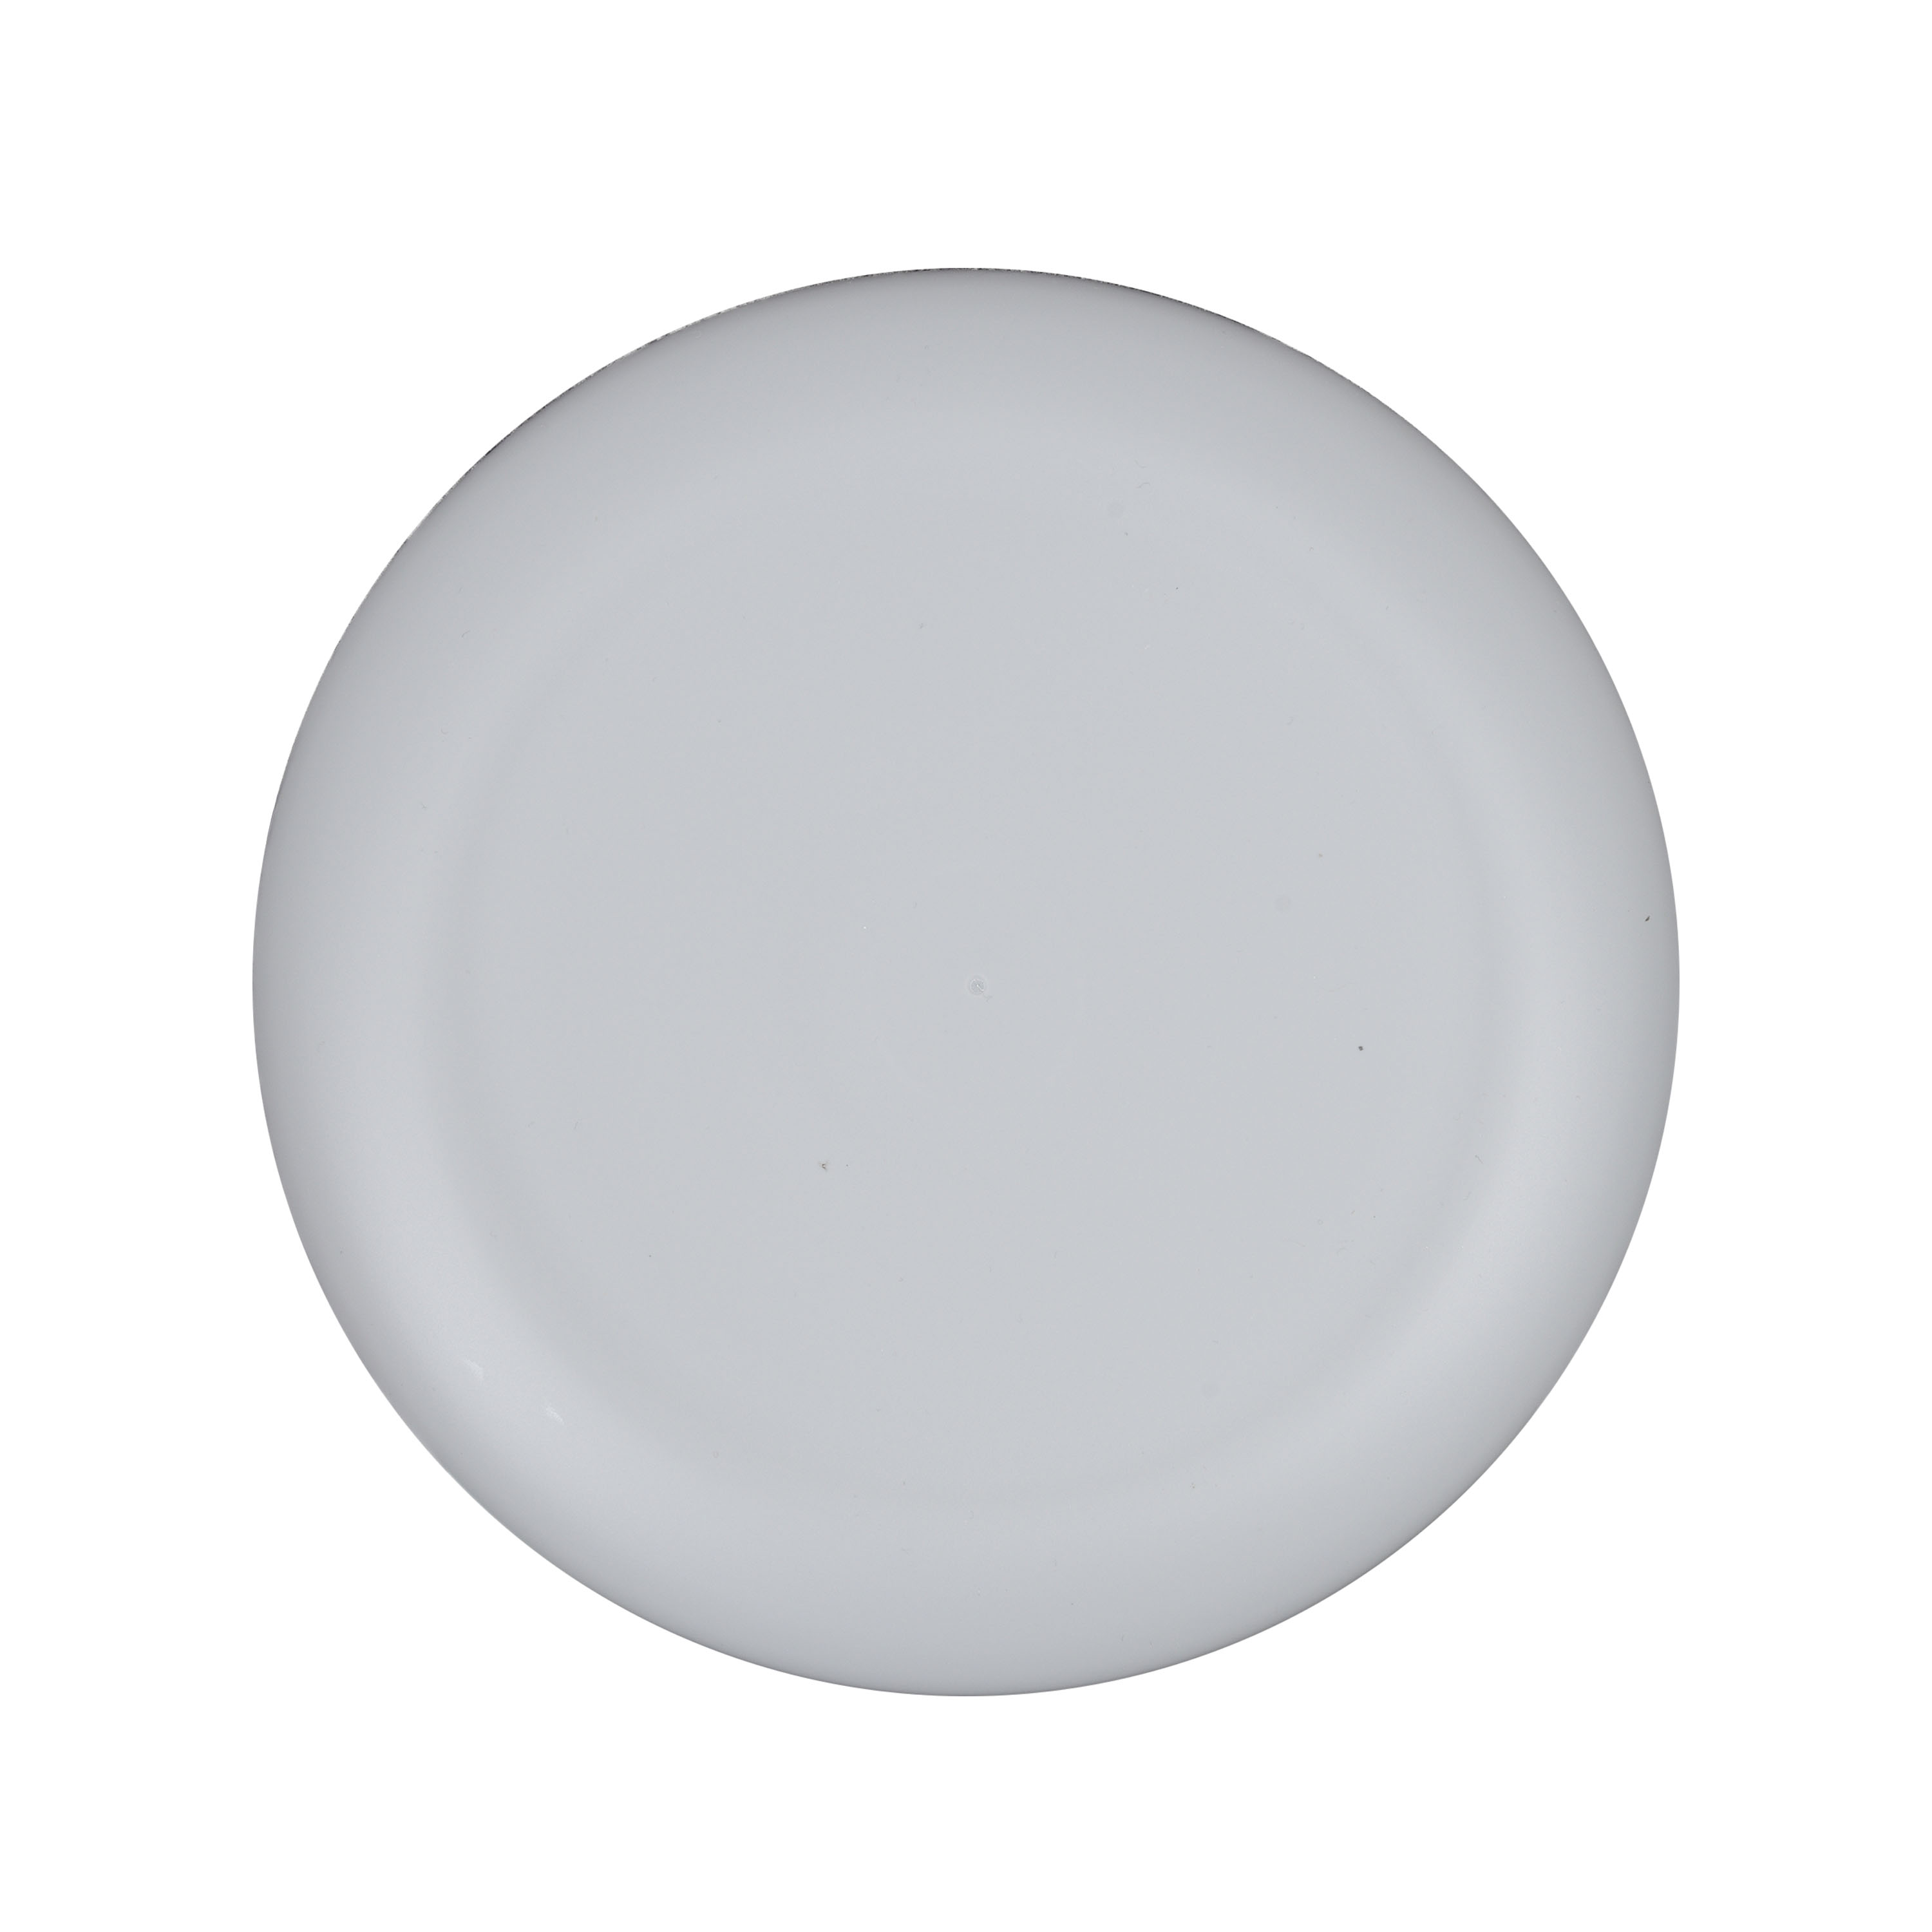 Mainstays - Gray Round Plastic Plate, 10.5 inch - image 4 of 4